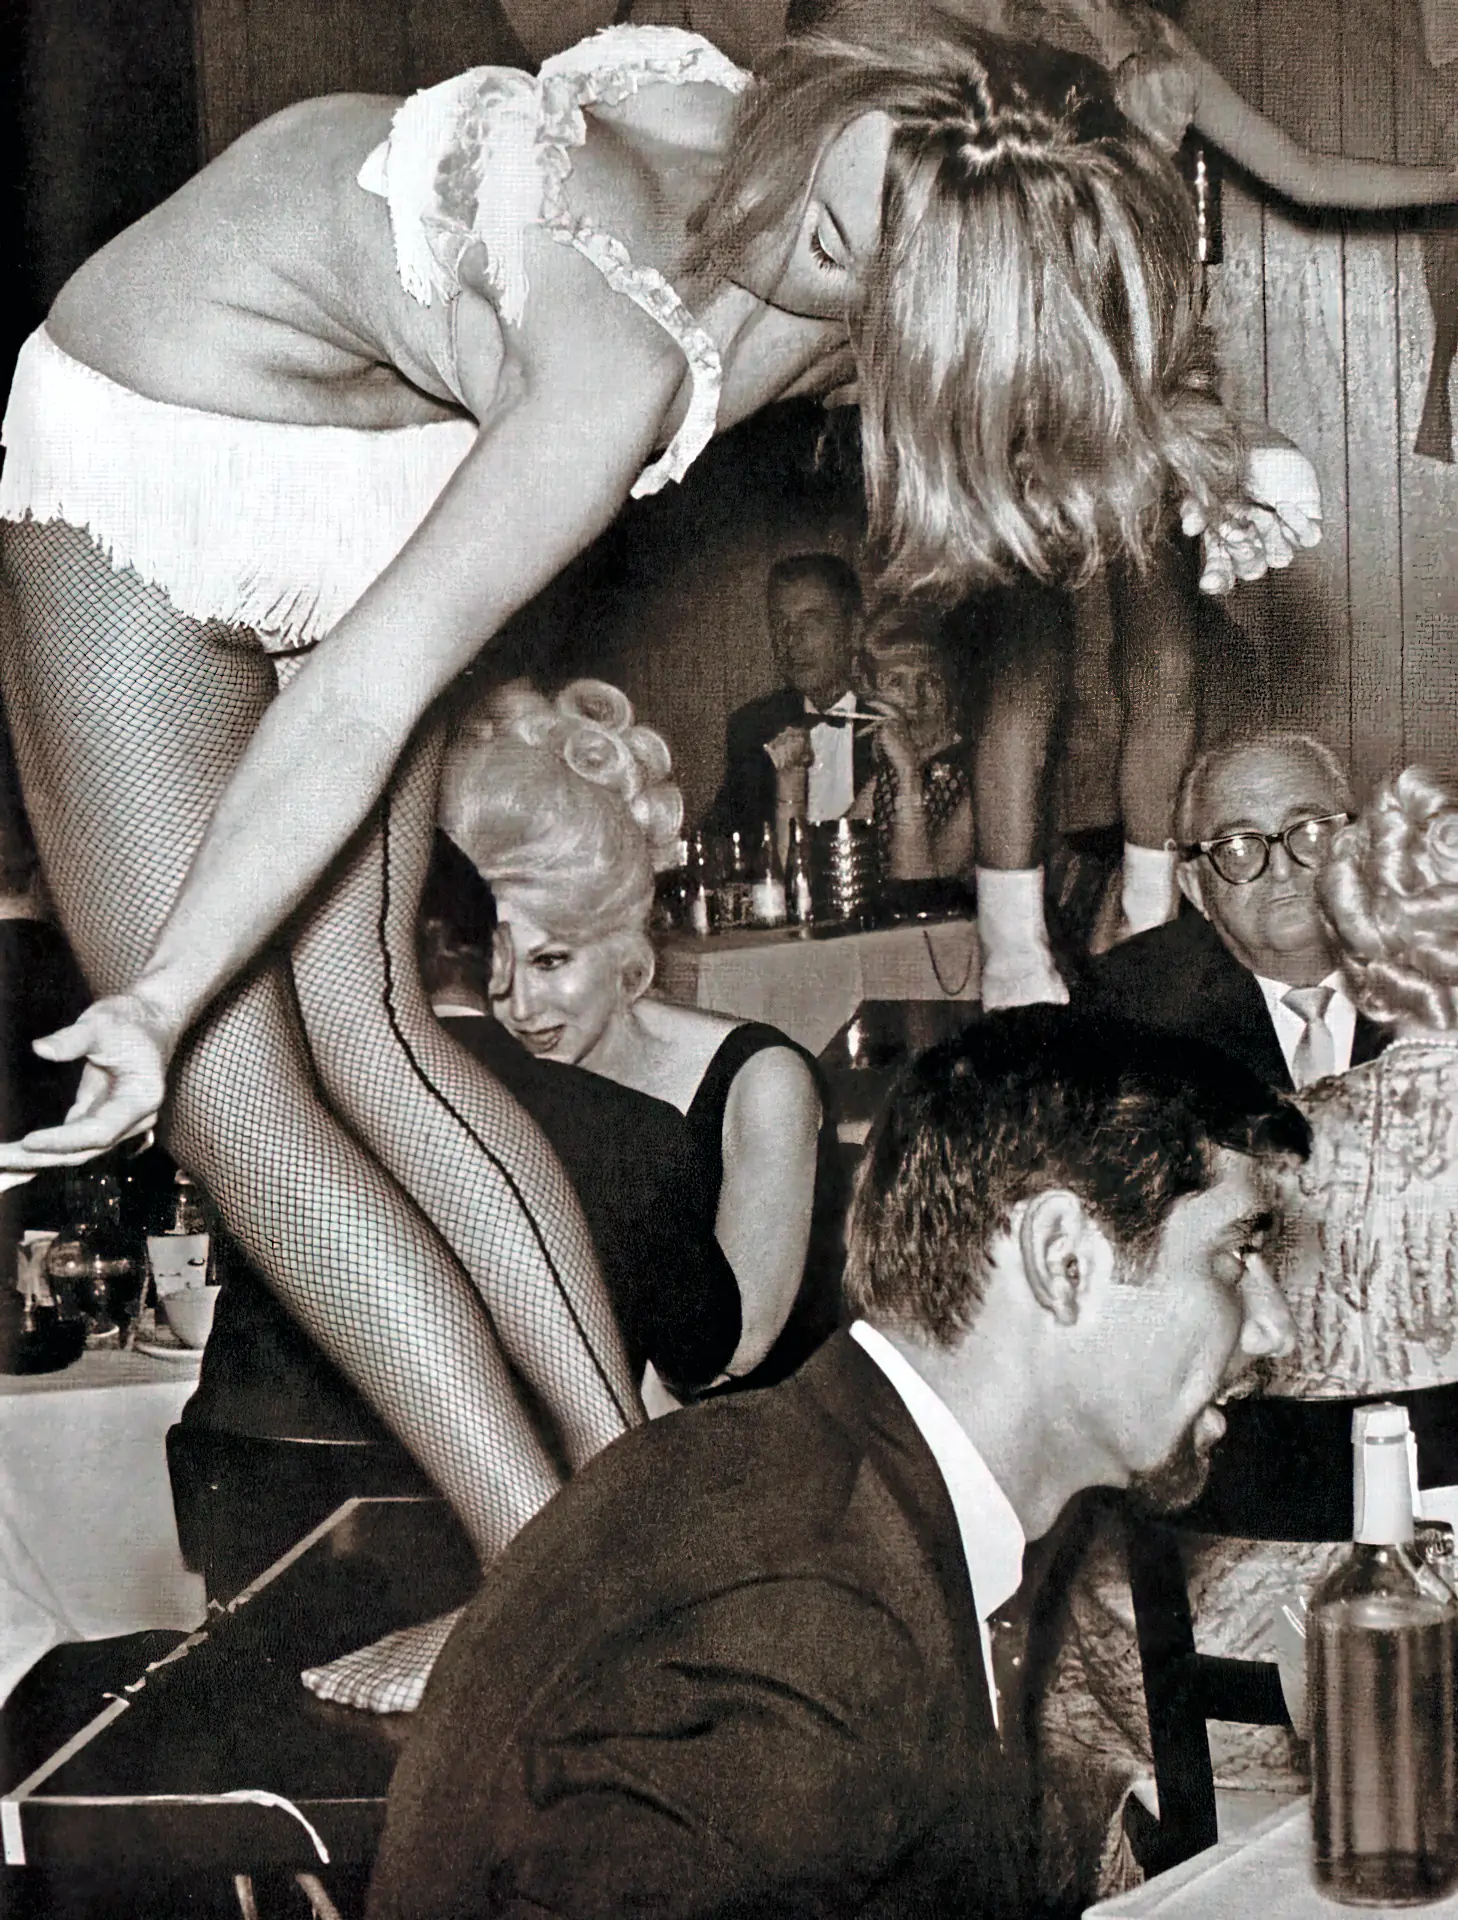 Burlesque girl in white undies dances on the table in a room full of people